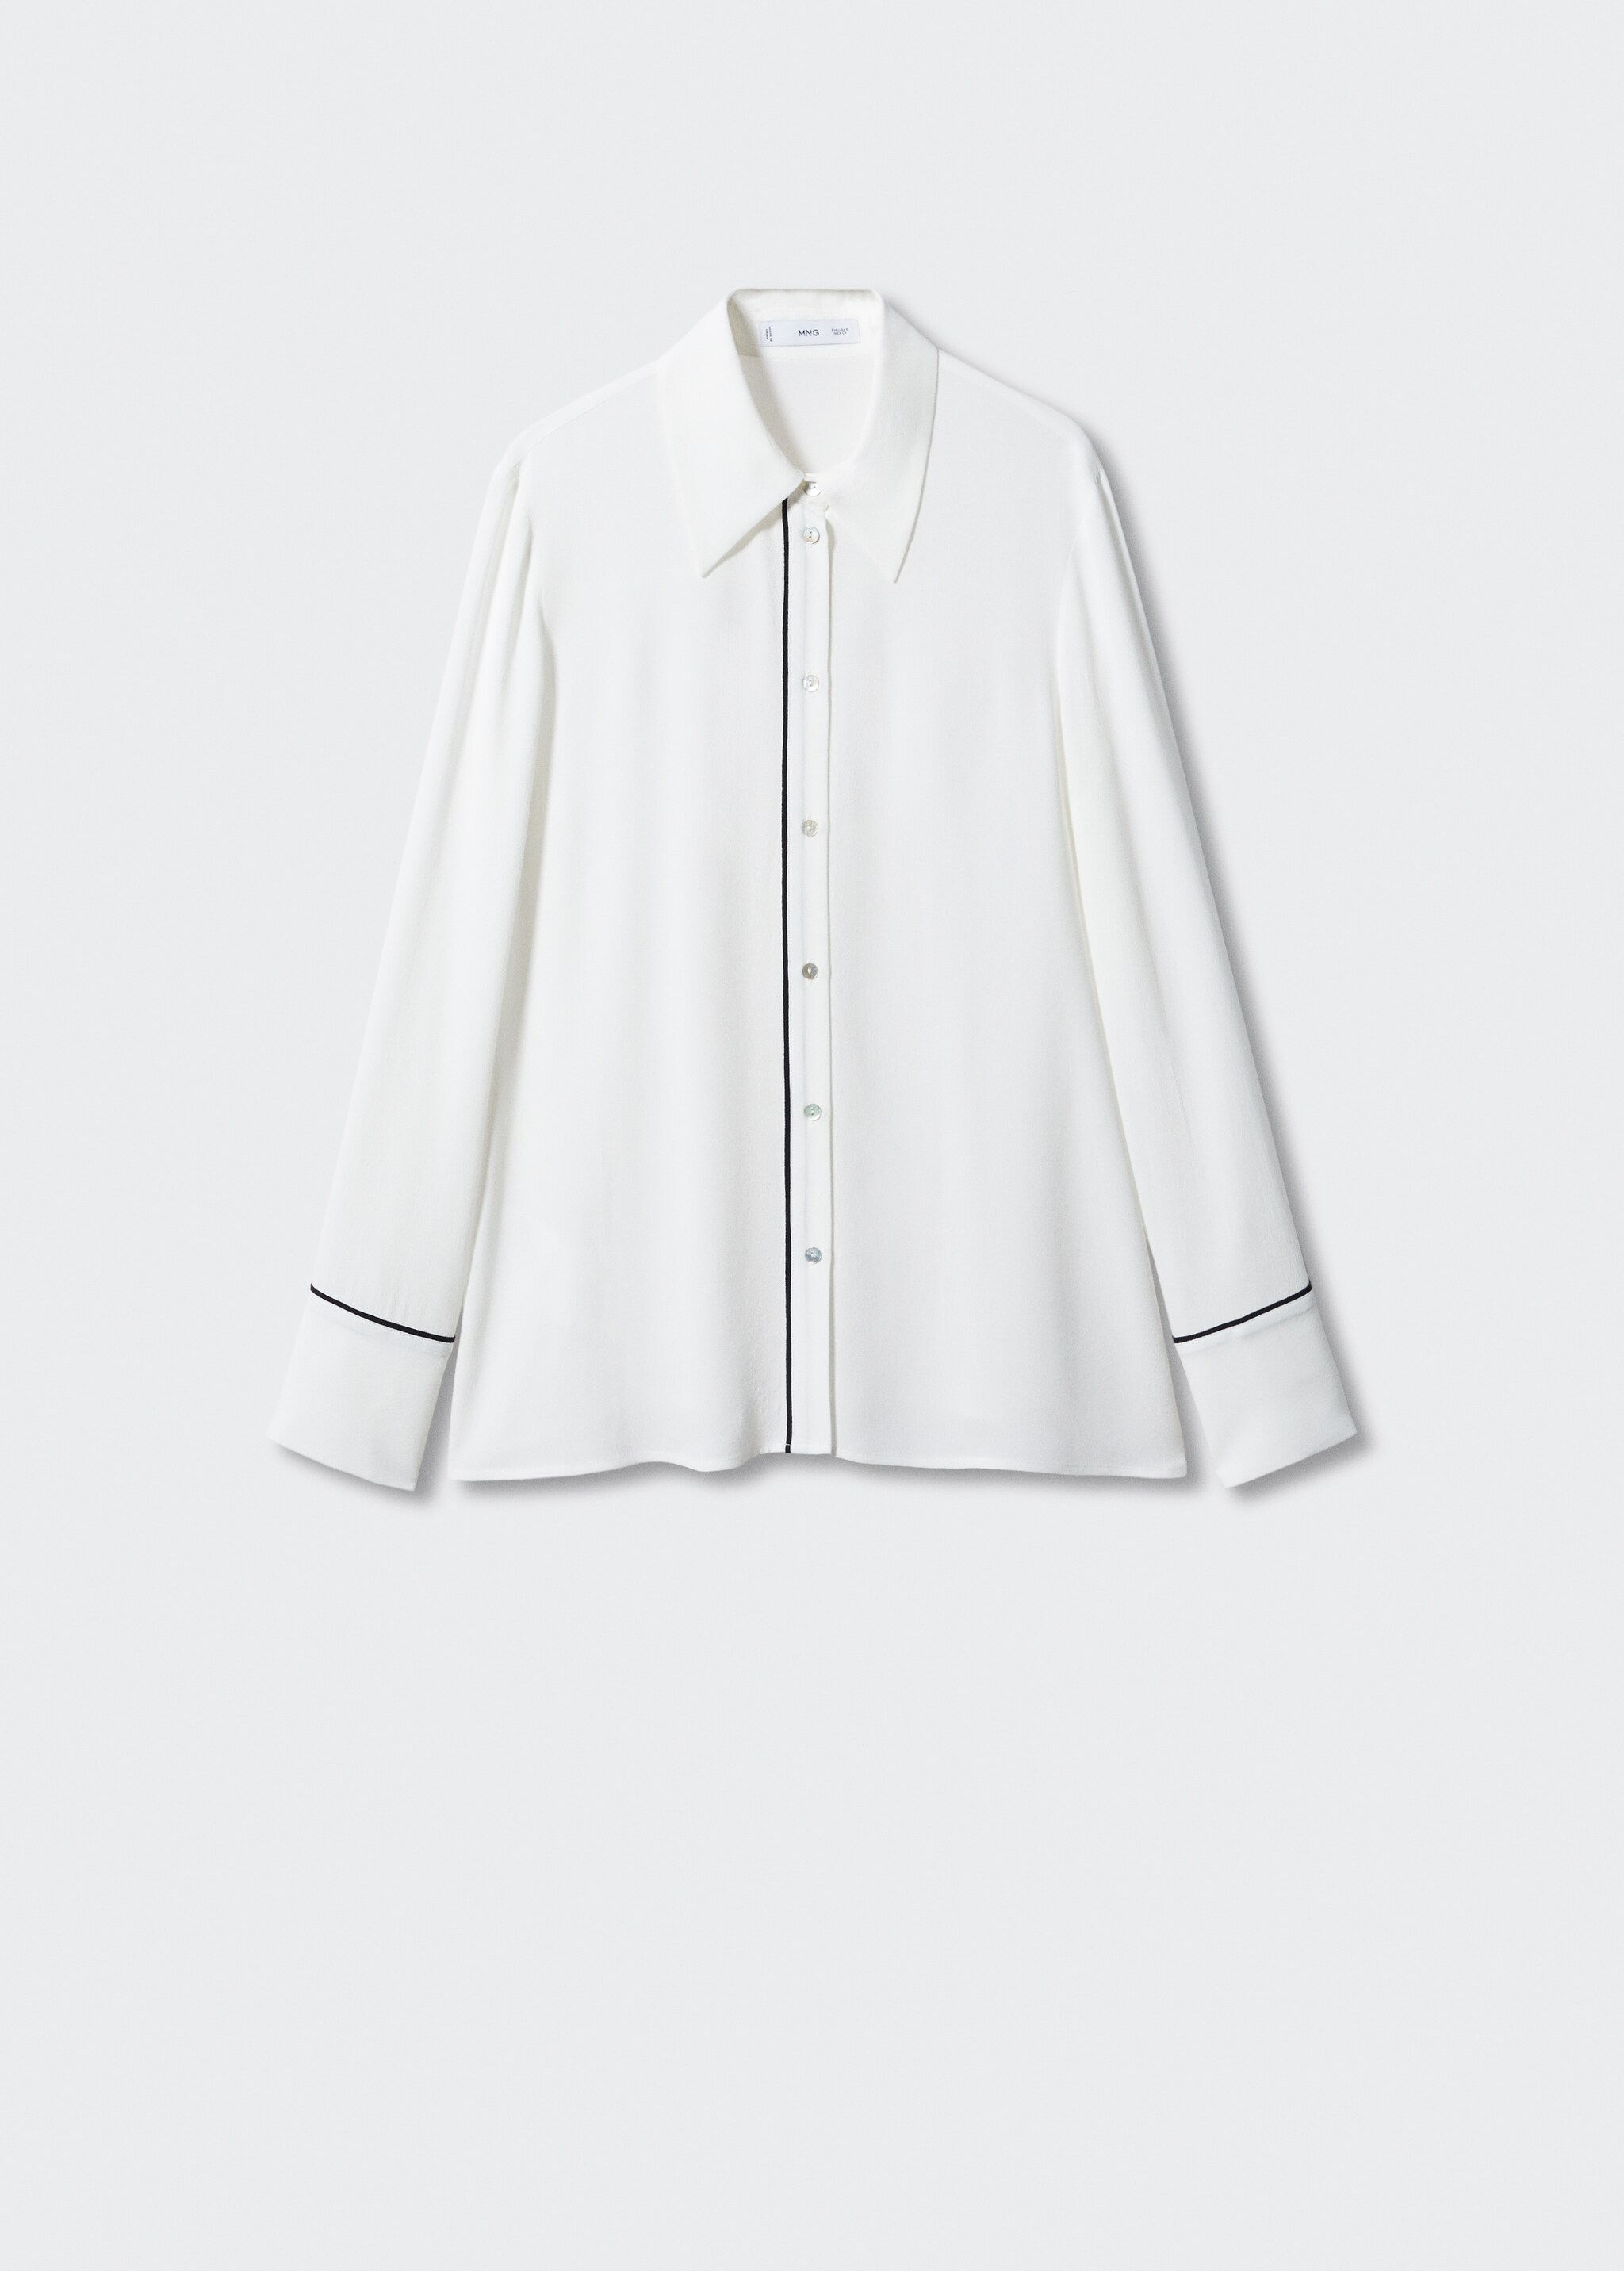 Contrast trim shirt - Article without model